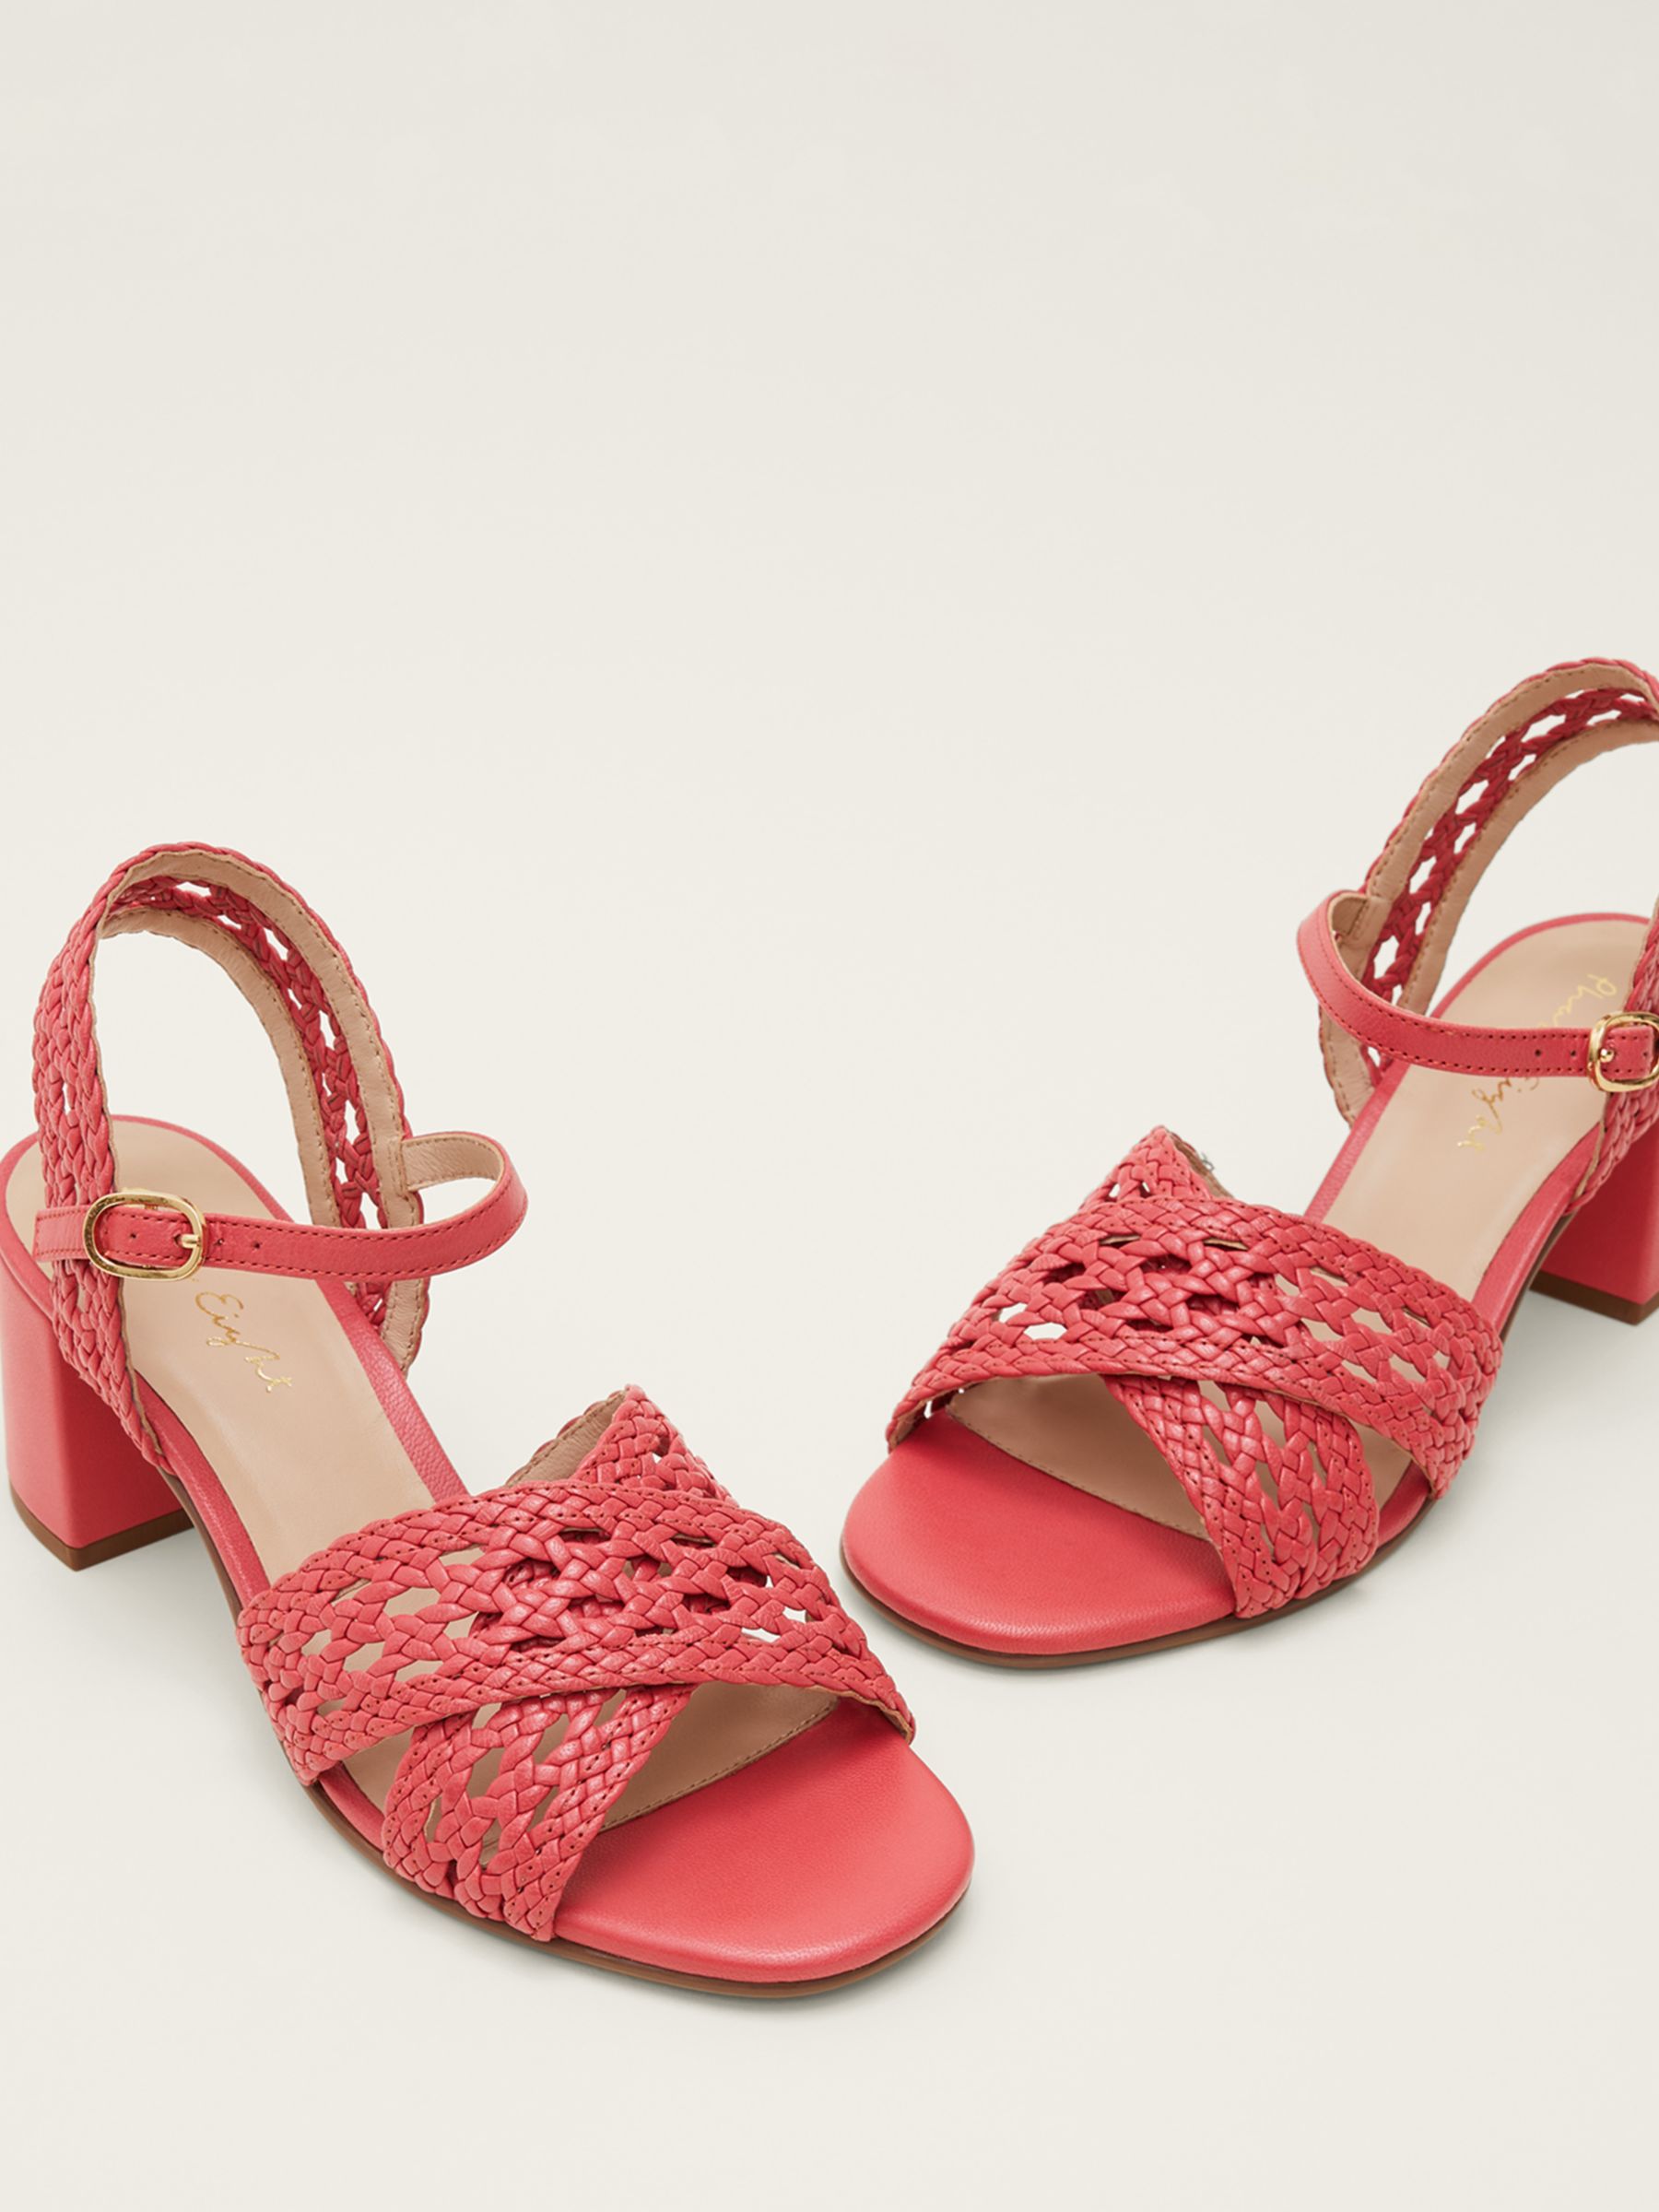 Phase Eight Weave Strap Sandals, Coral at John Lewis & Partners